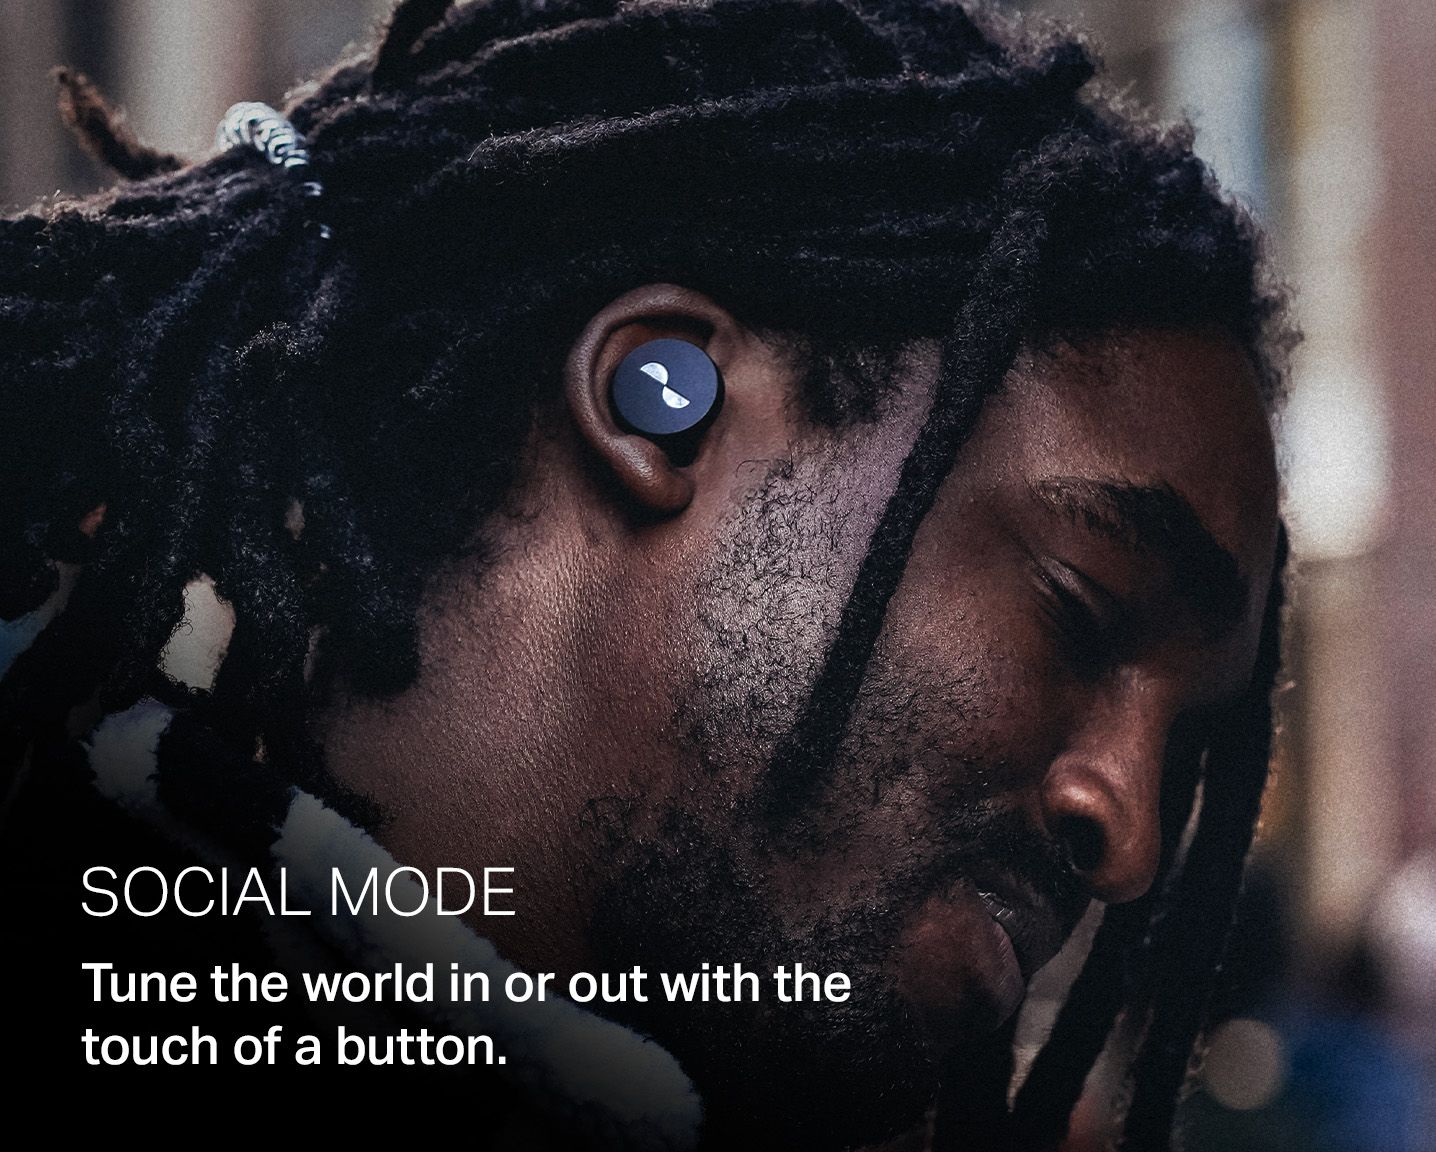 Person wearing the NURATRUE earbuds in ears, with overlay text: "Social mode. Tune the world in or out with the touch of a button."